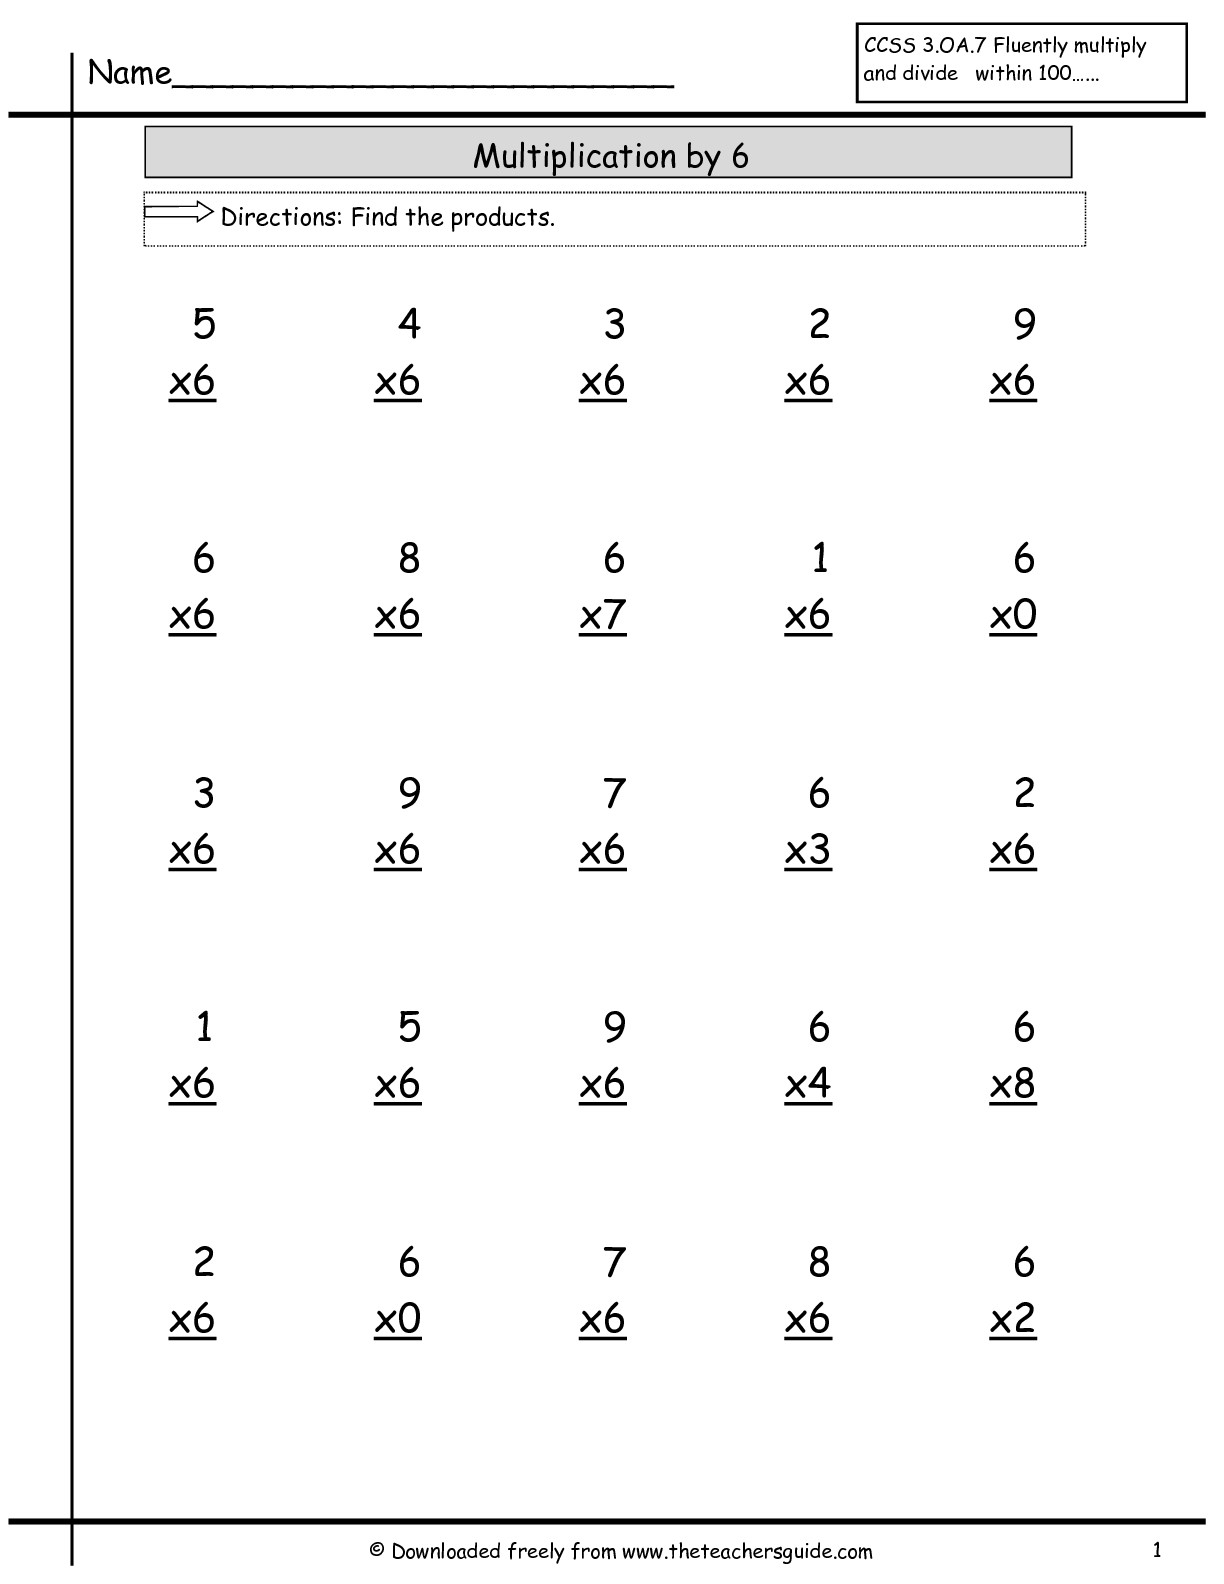 Multiplication Facts Worksheets From The Teacher's Guide within Printable Multiplication 8S